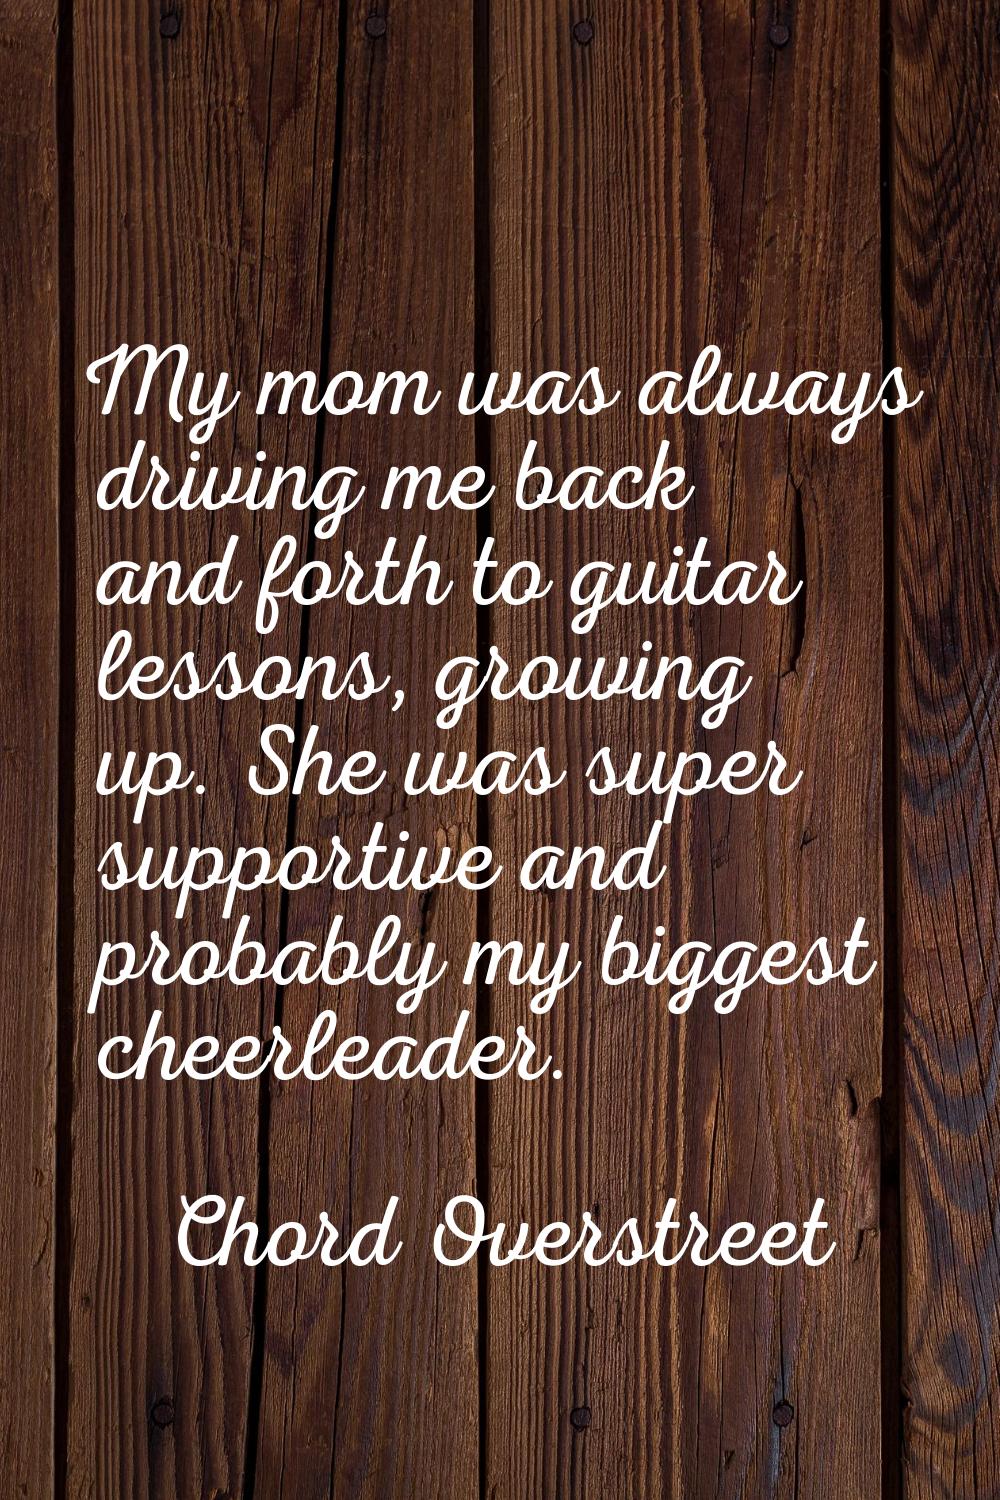 My mom was always driving me back and forth to guitar lessons, growing up. She was super supportive